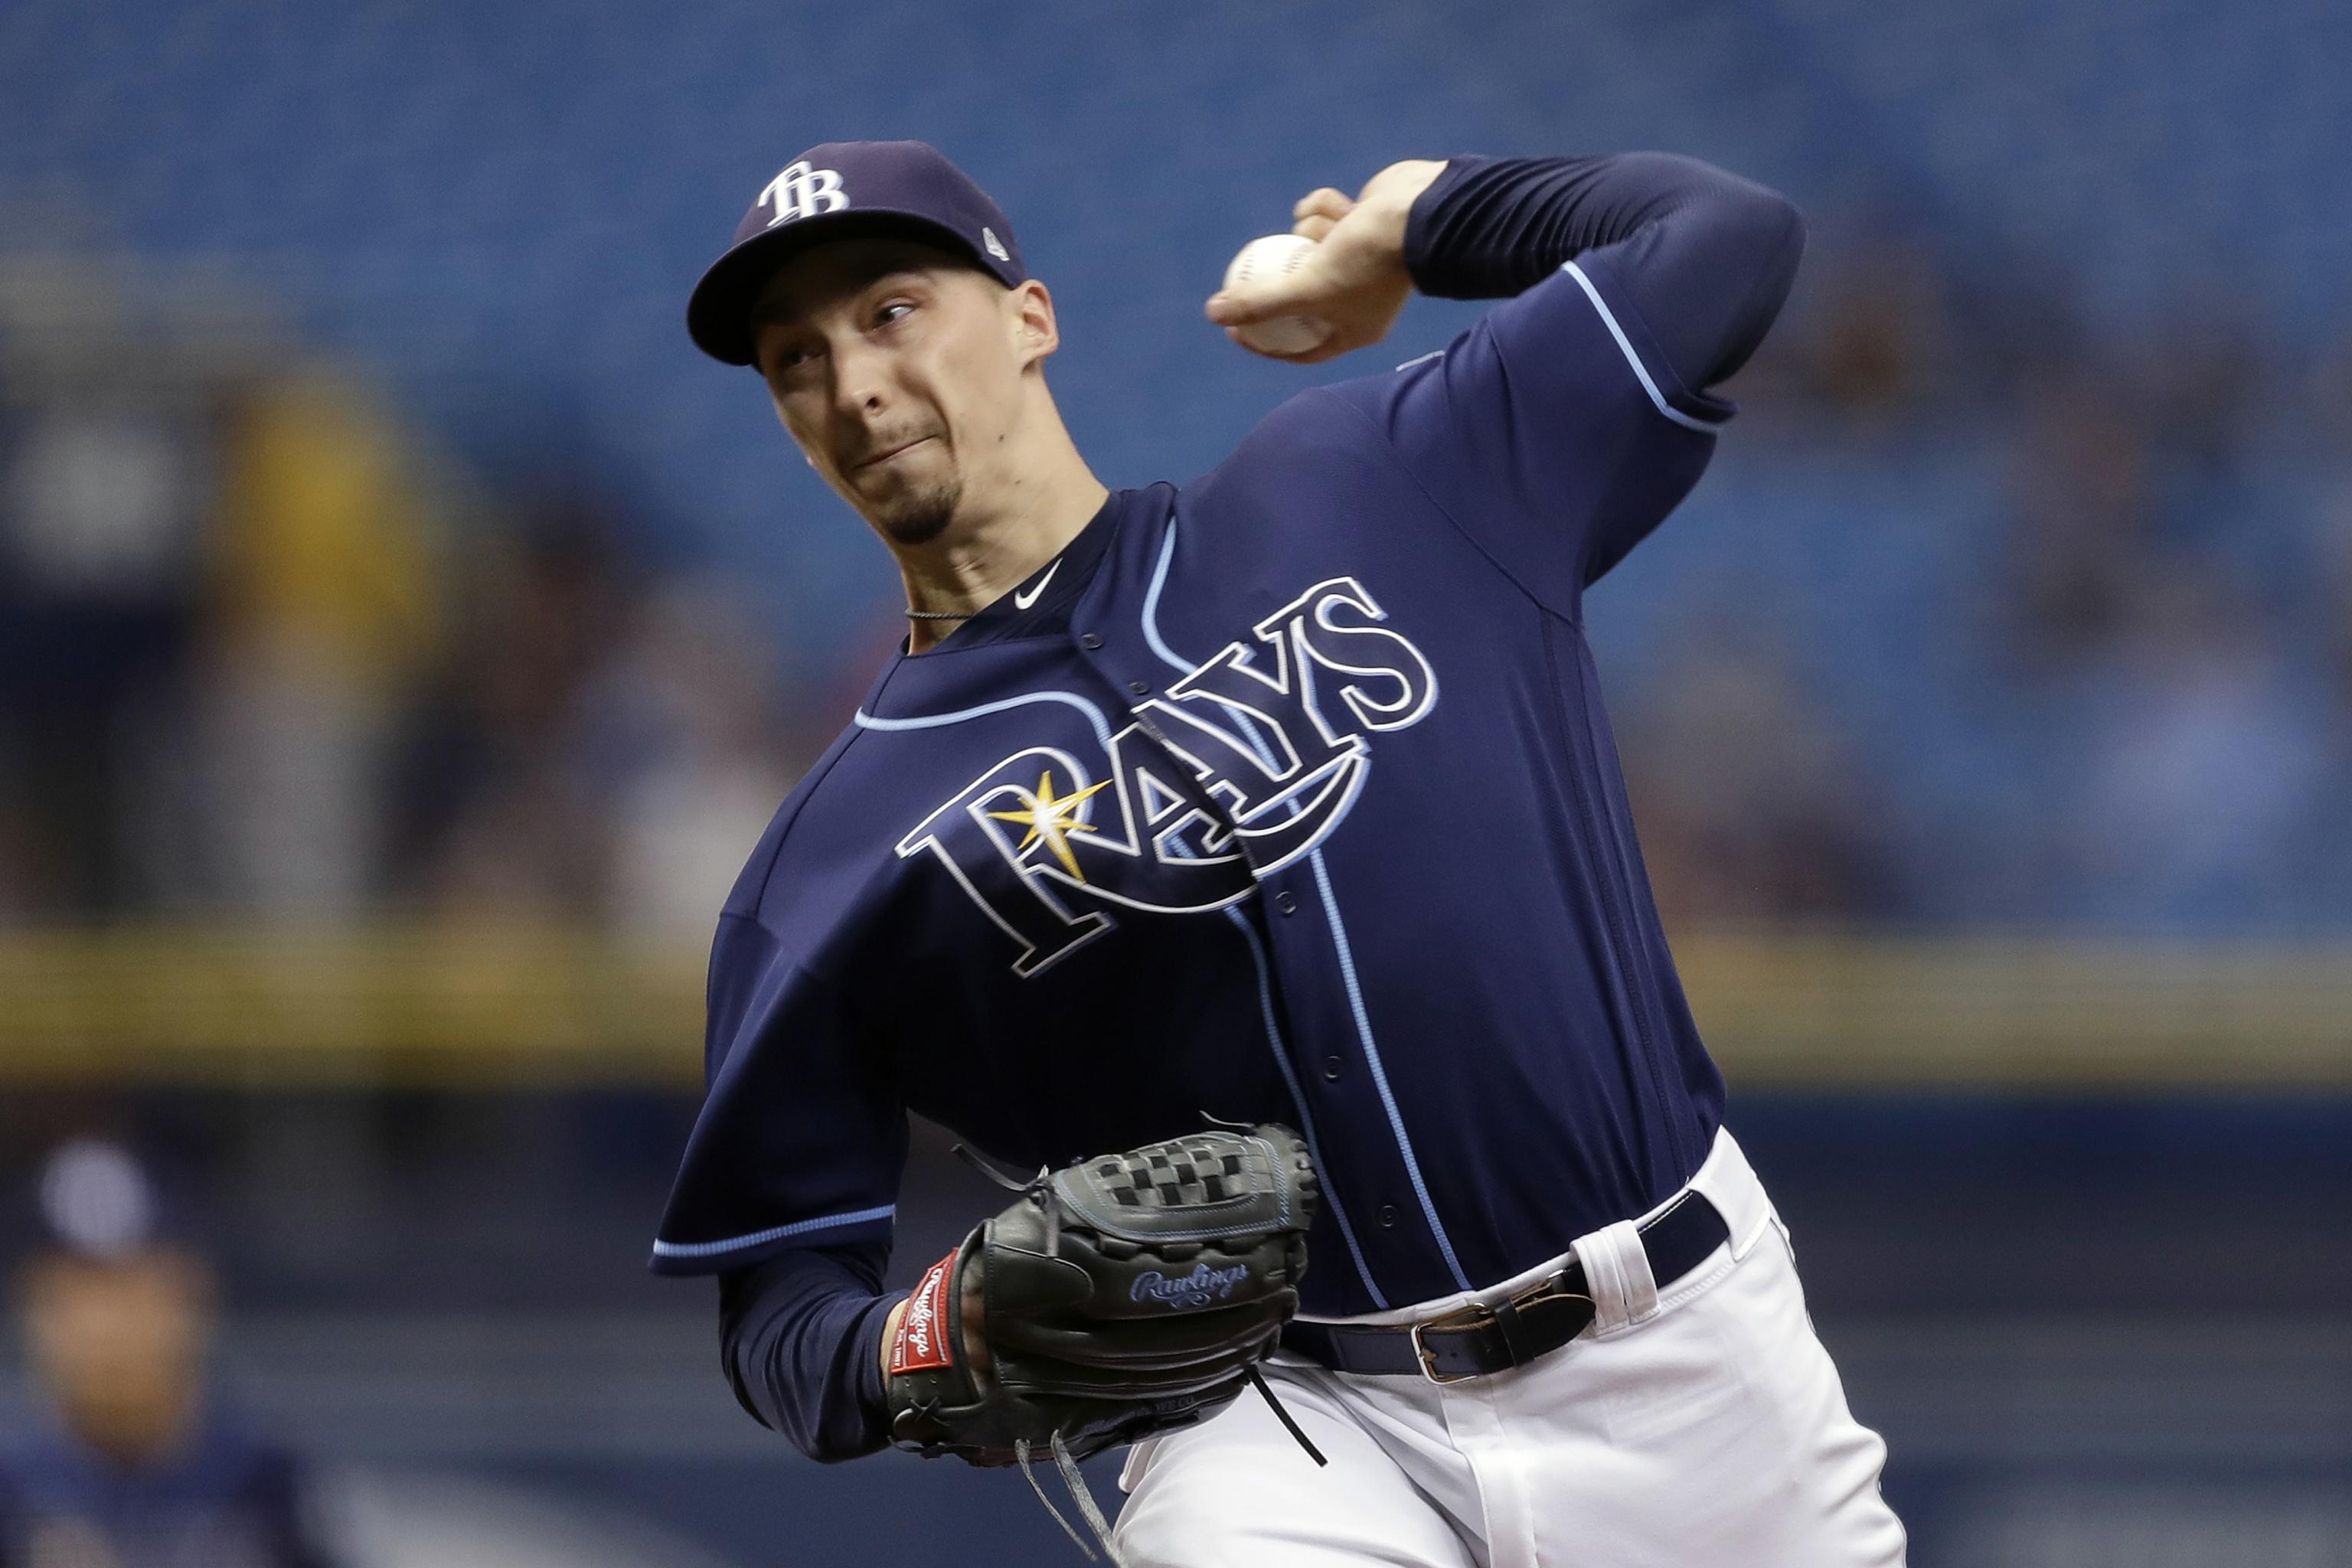 Rays' Blake Snell wins AL Cy Young award